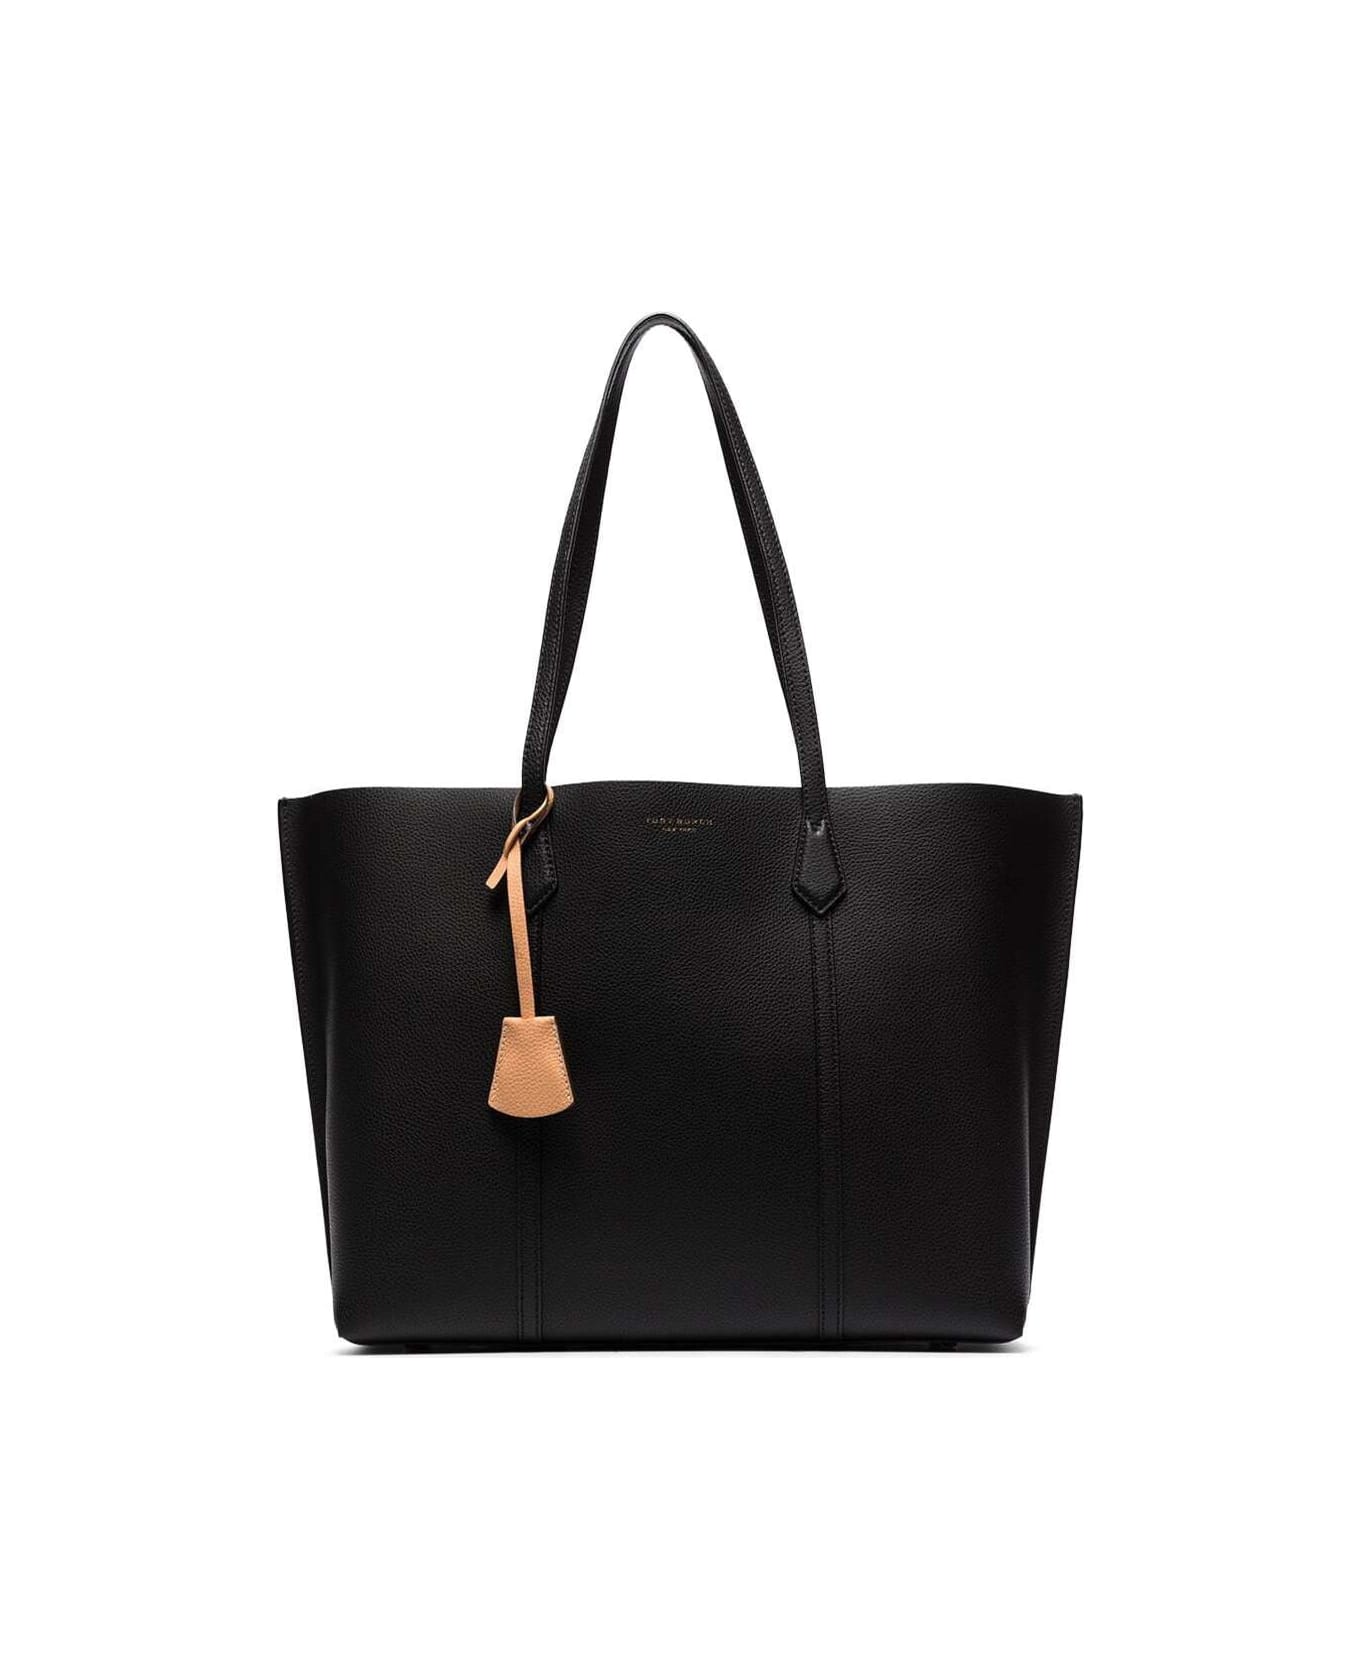 Tory Burch 'perry' Black Shopping Bag With Charm In Grainy Leather Woman Tory Burch - Black